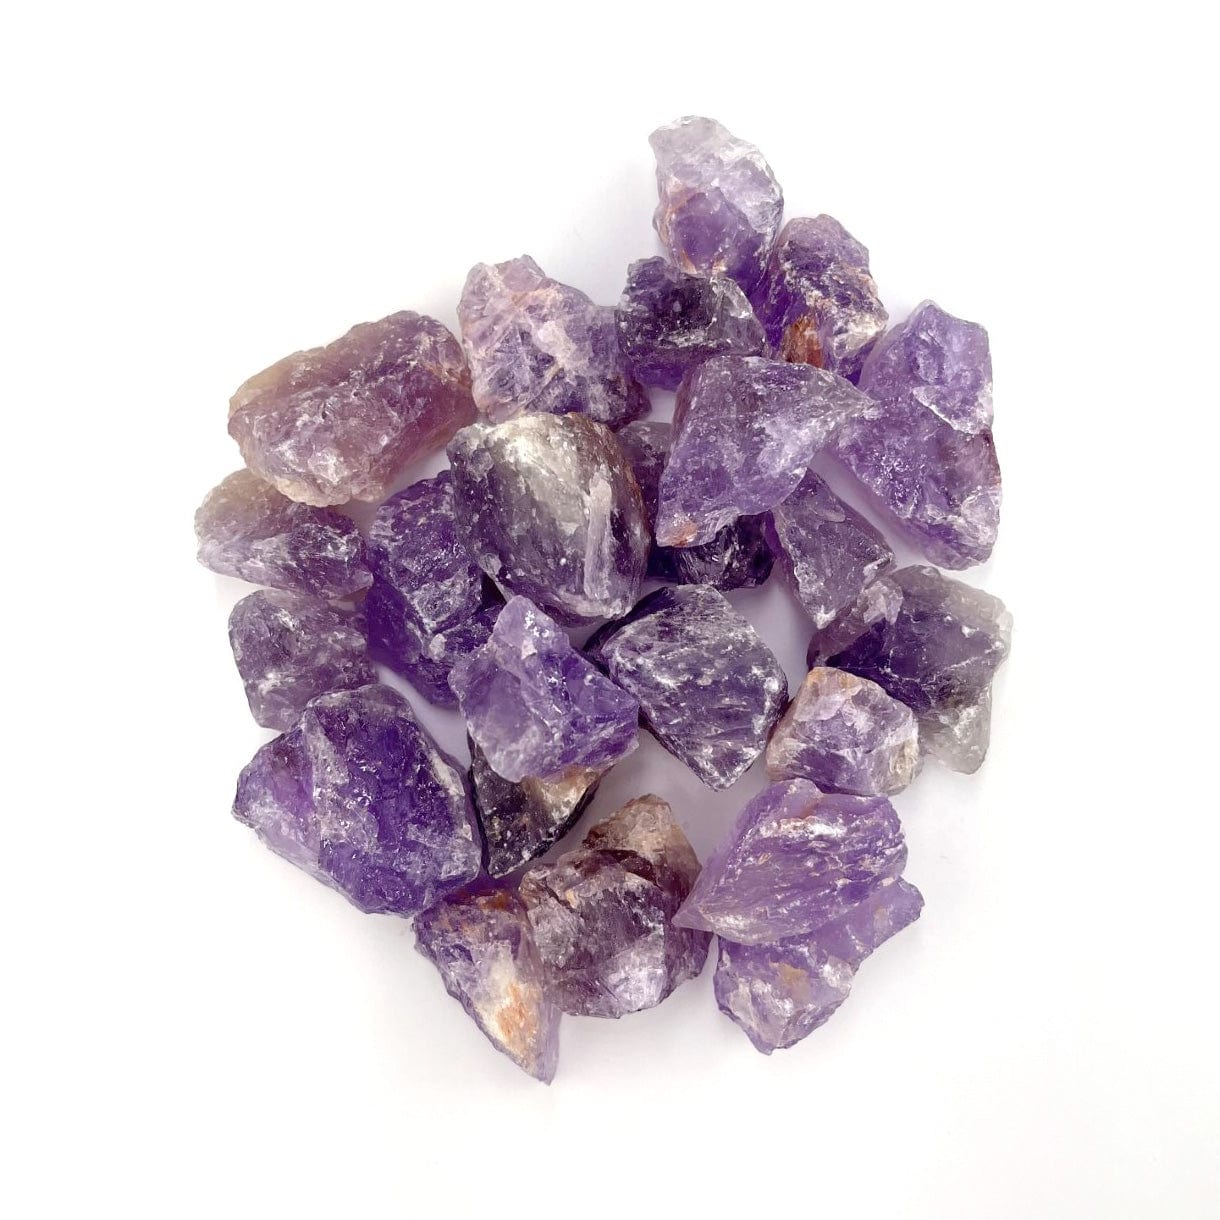 Amethyst Natural Stones in a pile